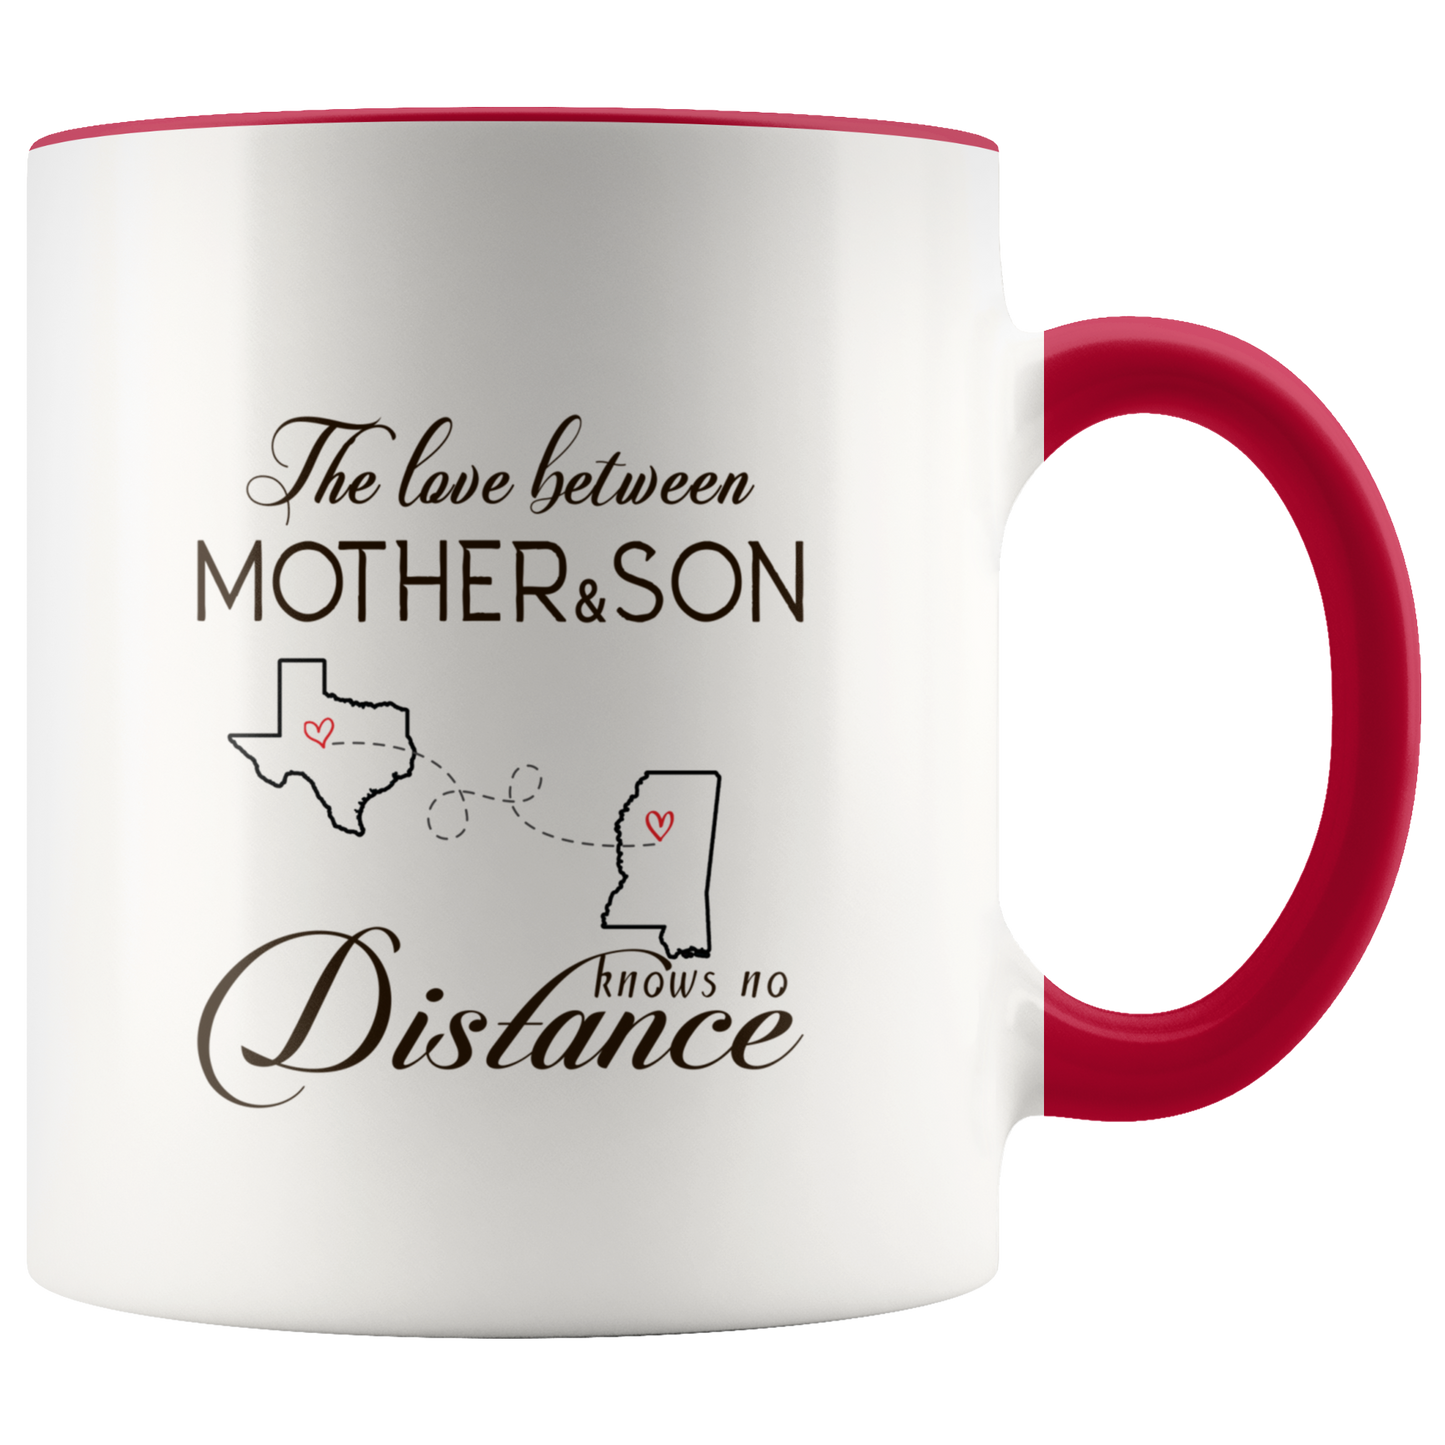 ND-21335812-sp-24093 - [ Texas | Mississippi ]Long Distance Accent Mug 11 oz Red - The Love Between Mother